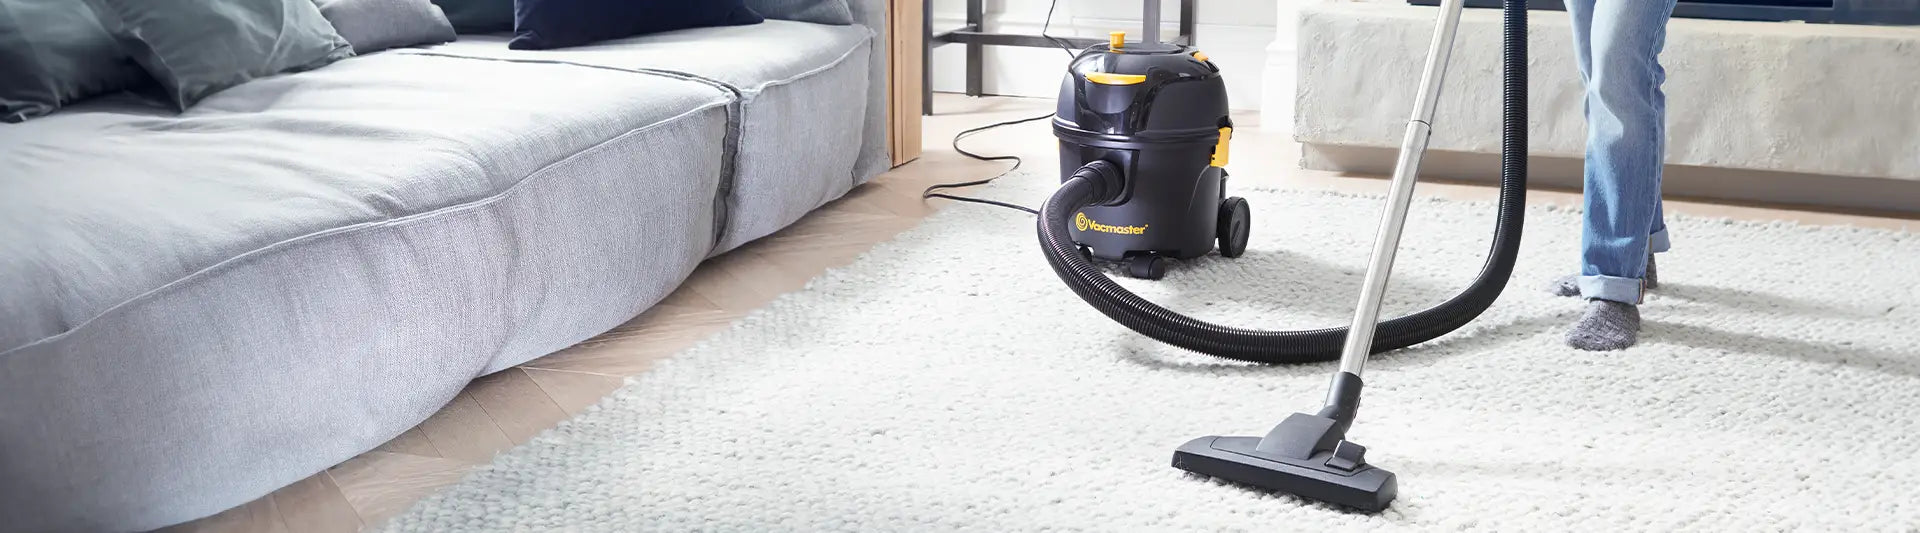 Vacmaster Cylinder Vacuum Cleaners 